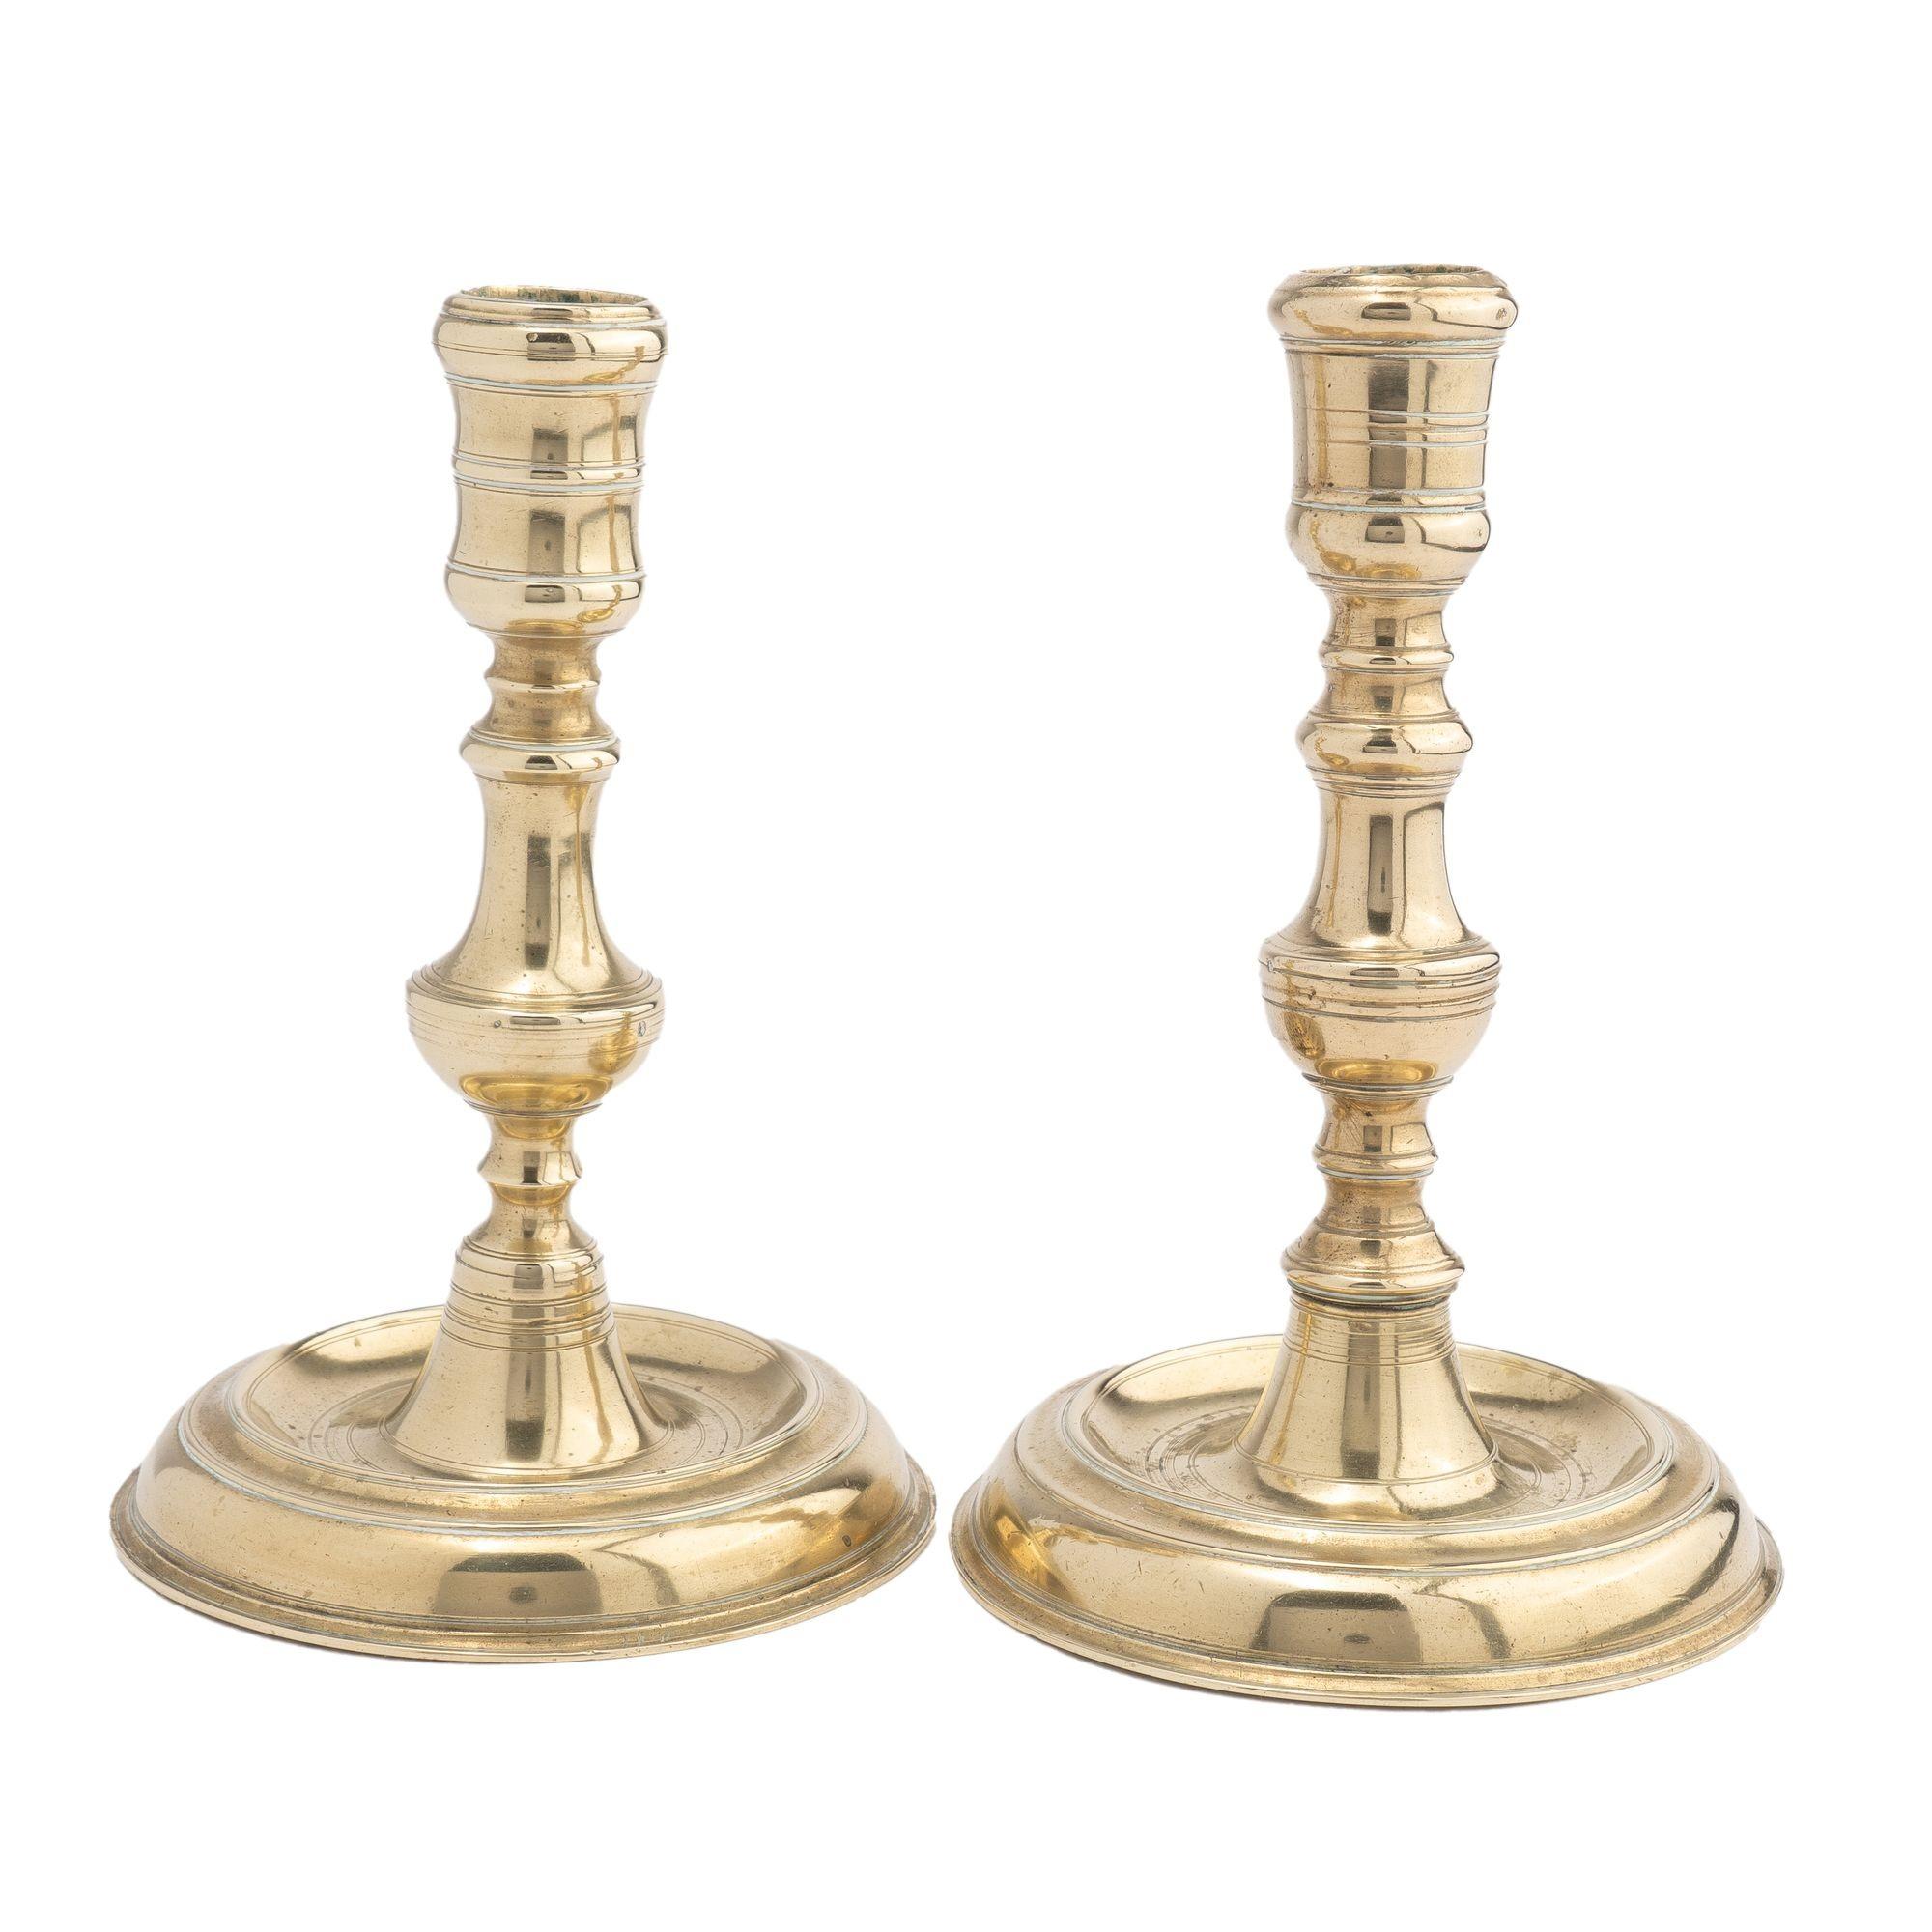 Assembled pair of cast brass chamber candlesticks with the same impressed monogram reading 